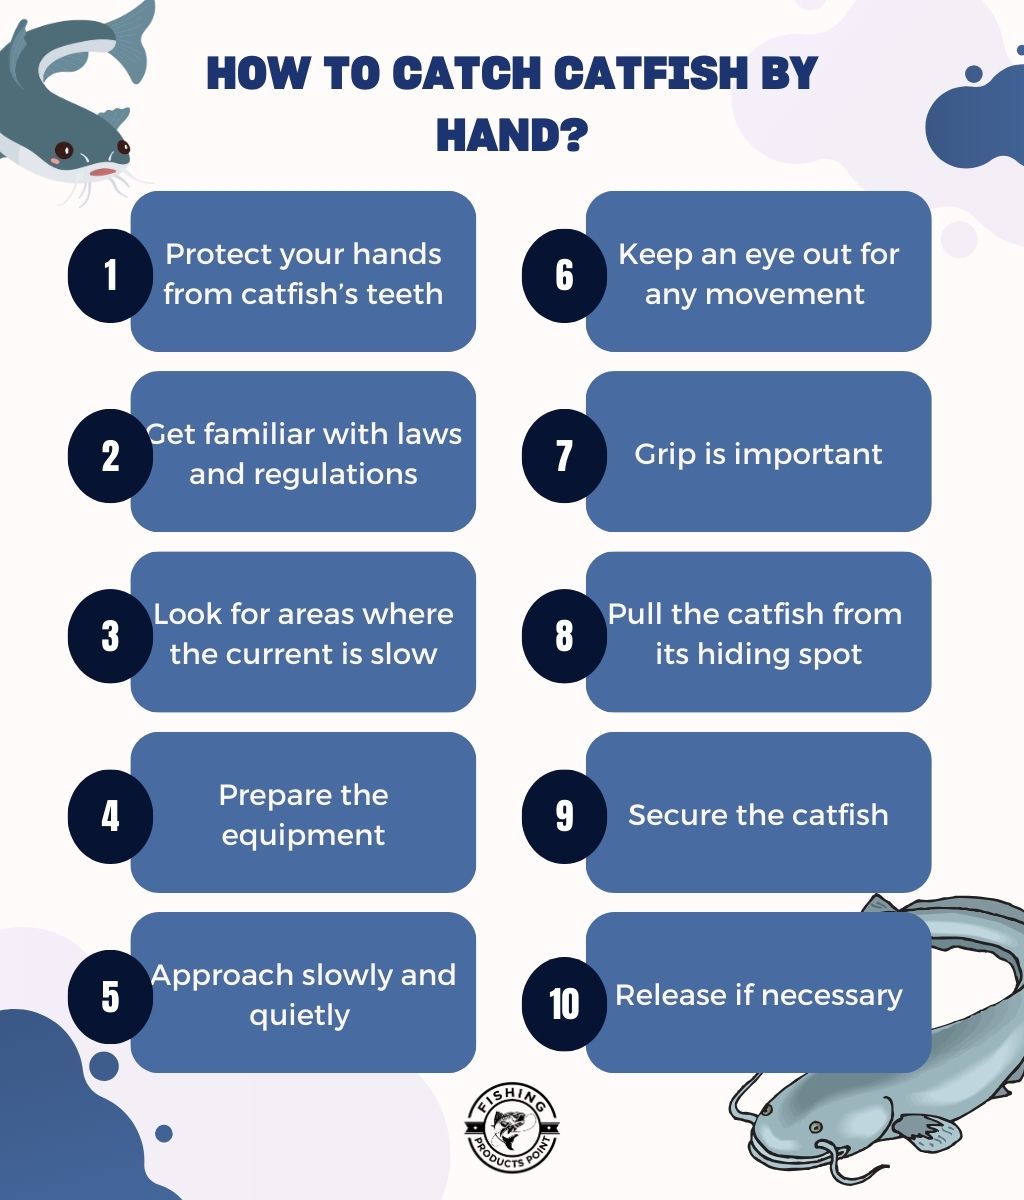 How to Catch Catfish by Hand infographic